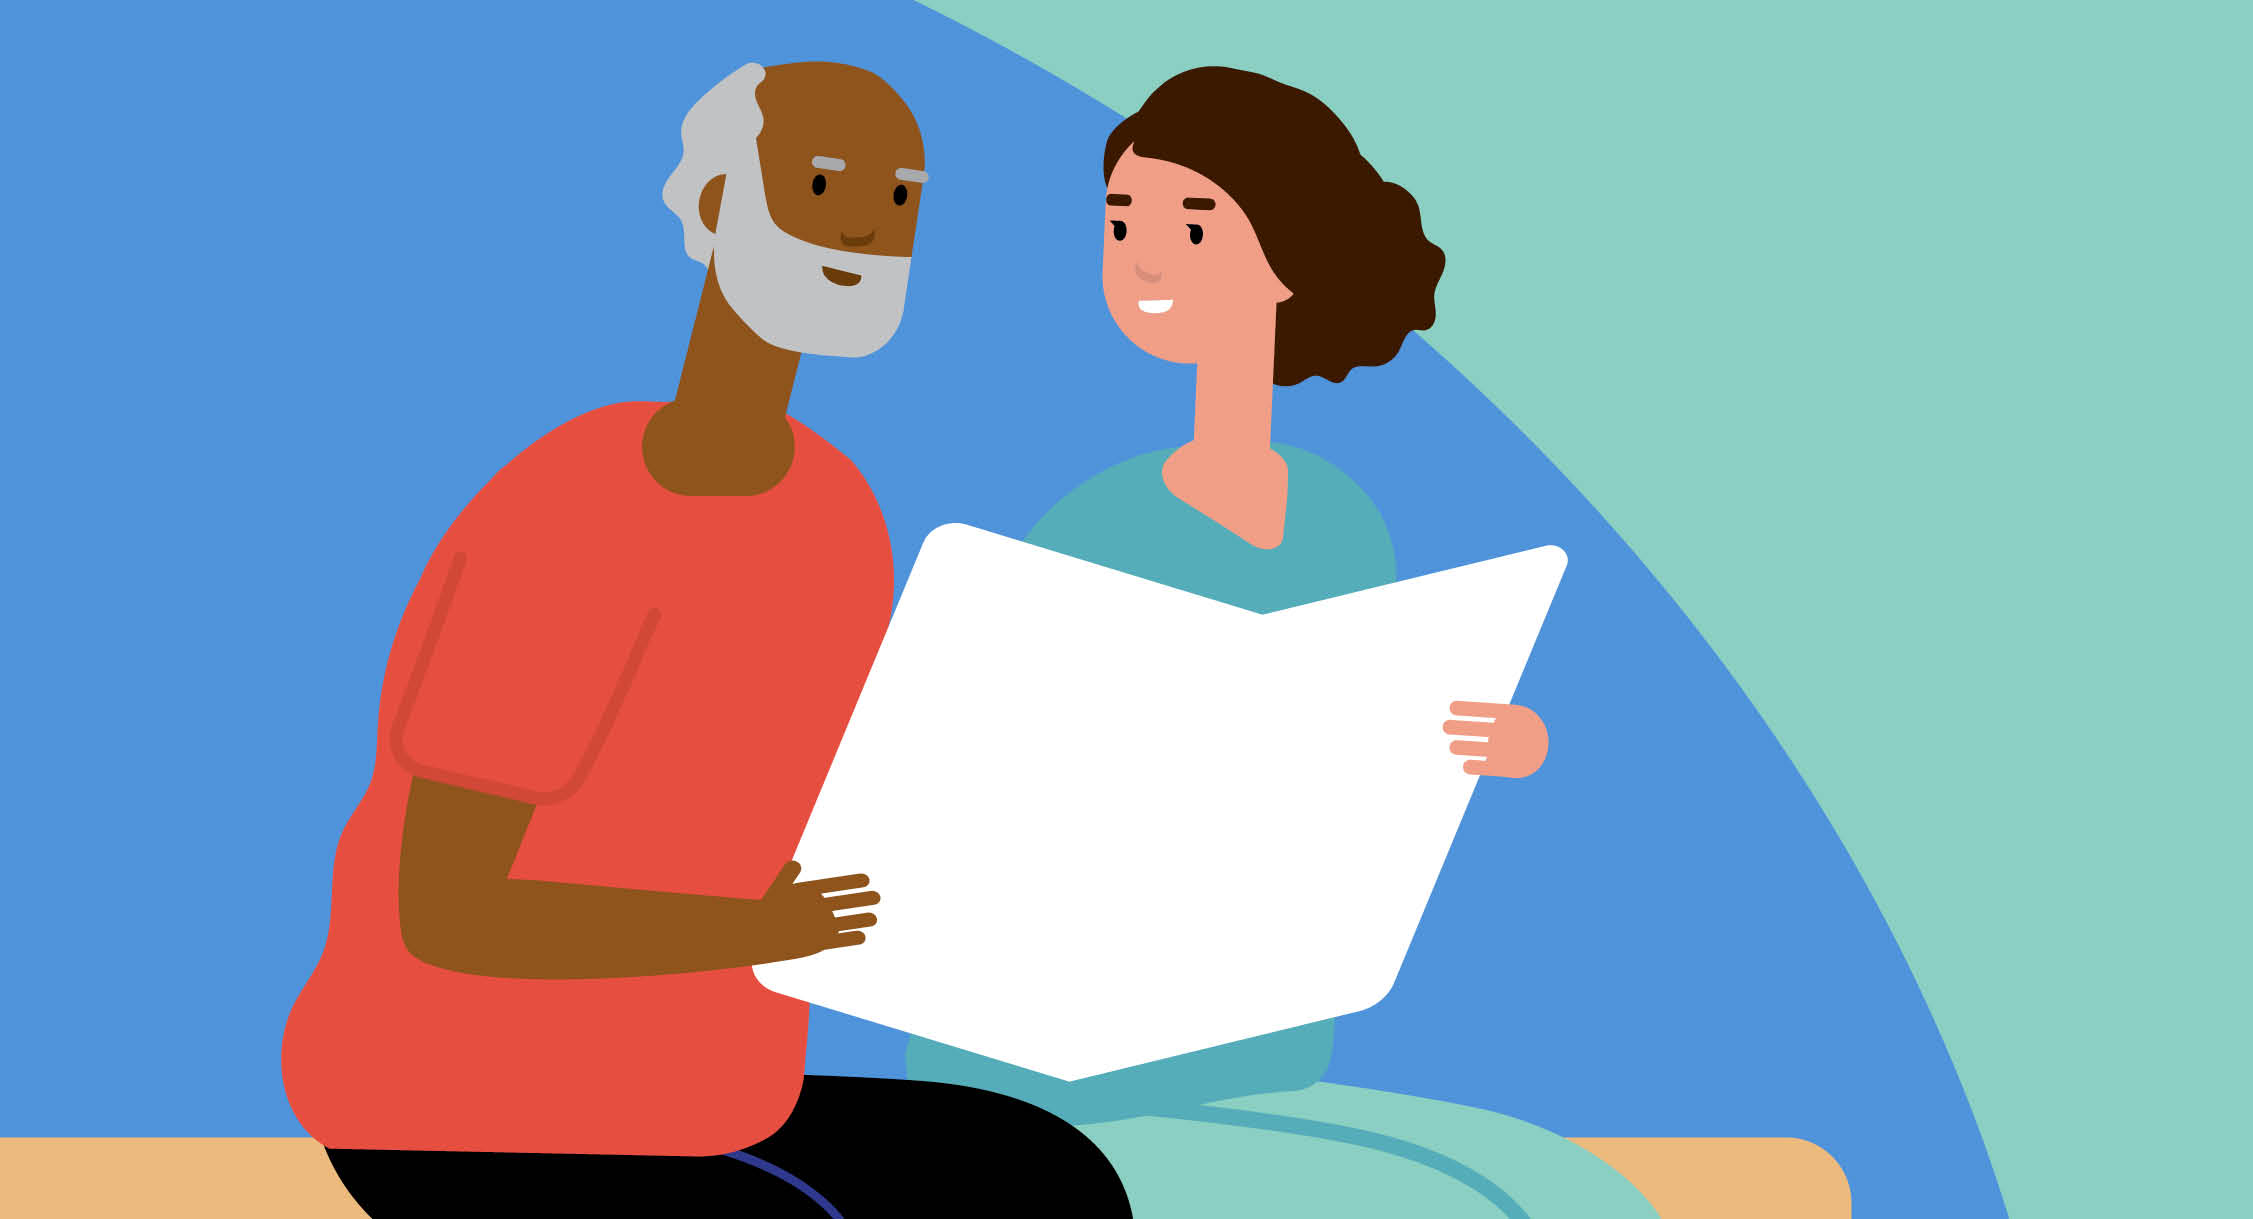 A stylized graphic of a man and a woman reading a large white book.